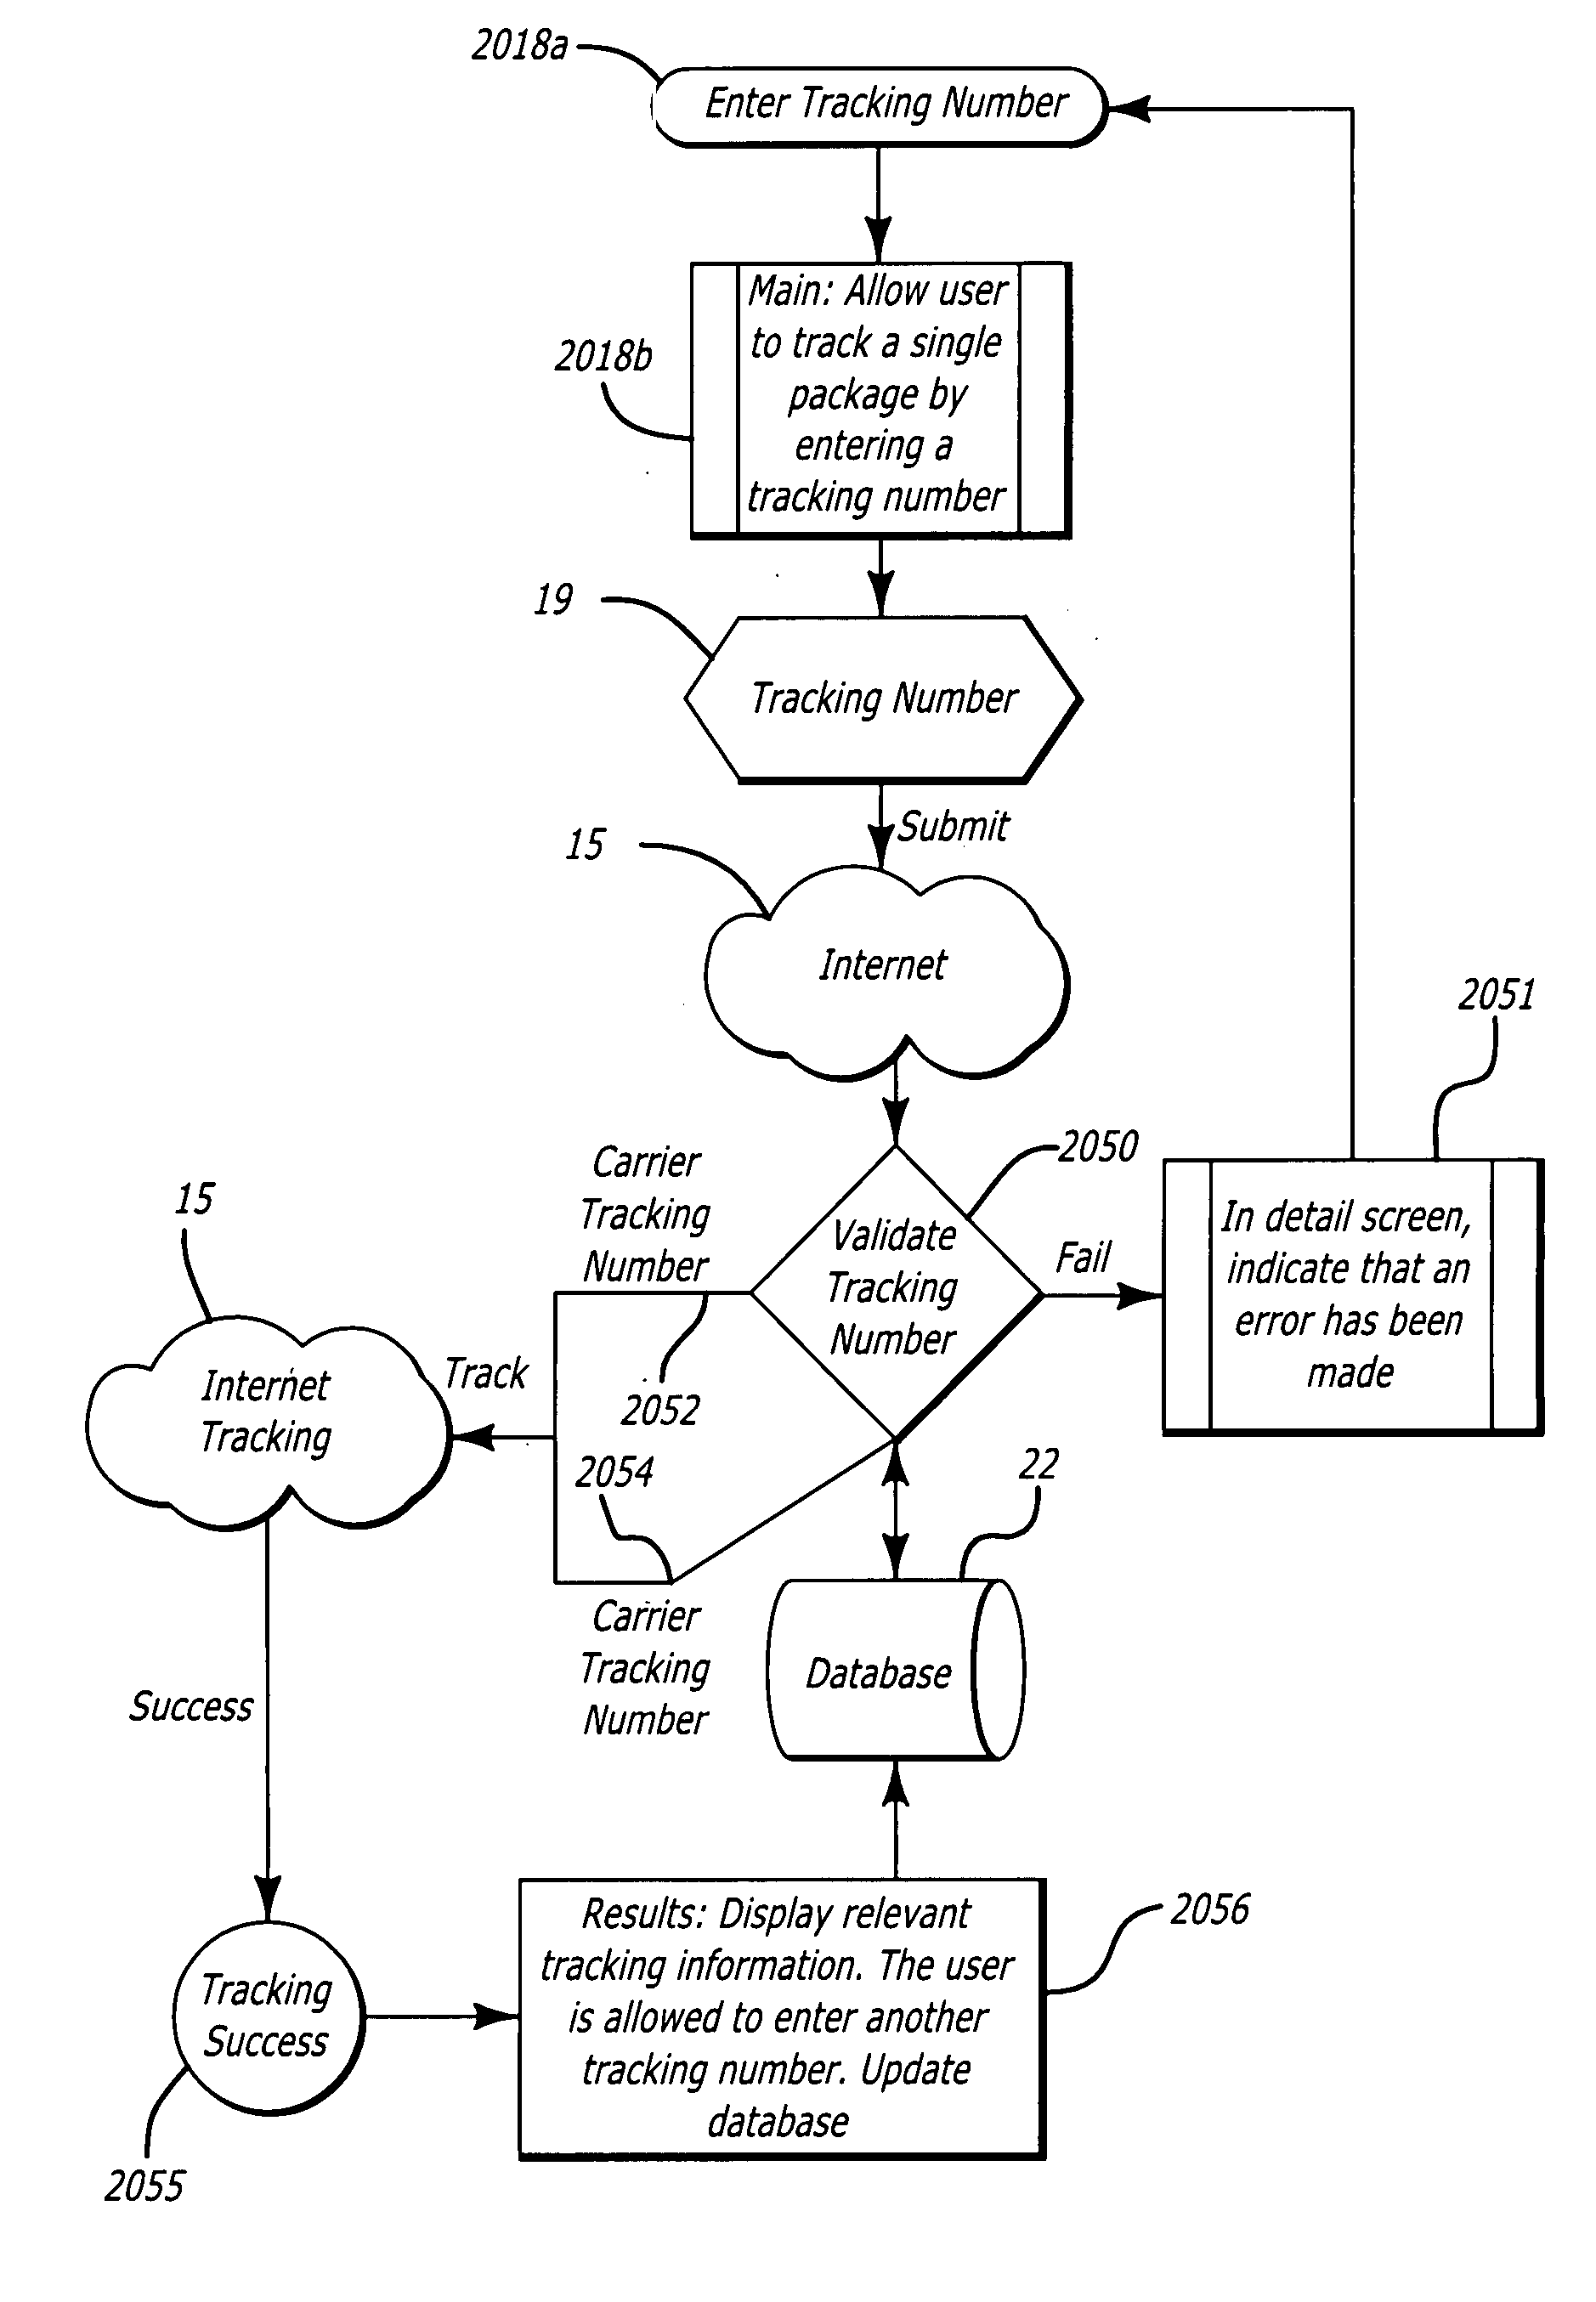 Apparatus, systems and methods for interfacing with digital scales configured with remote client computer devices